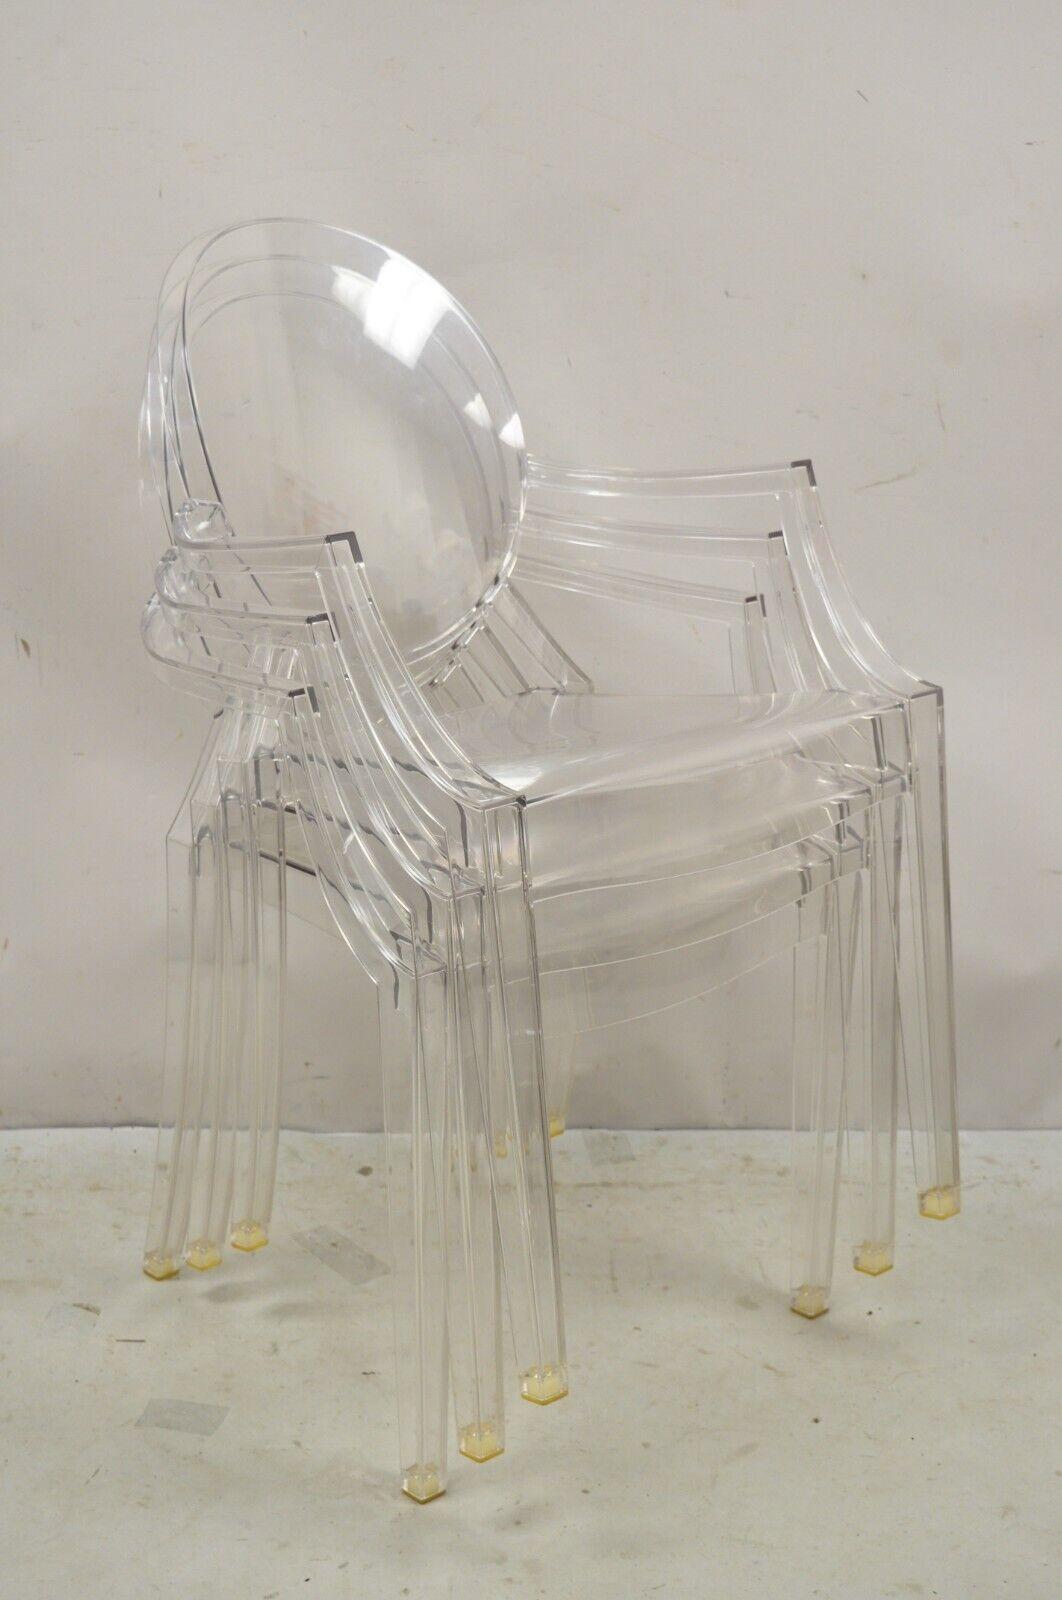 Kartell Designs Louis Ghost Arm Chair Philippe Starck - Set of 3. circa late 20th - 21st century Measurements: 36.5